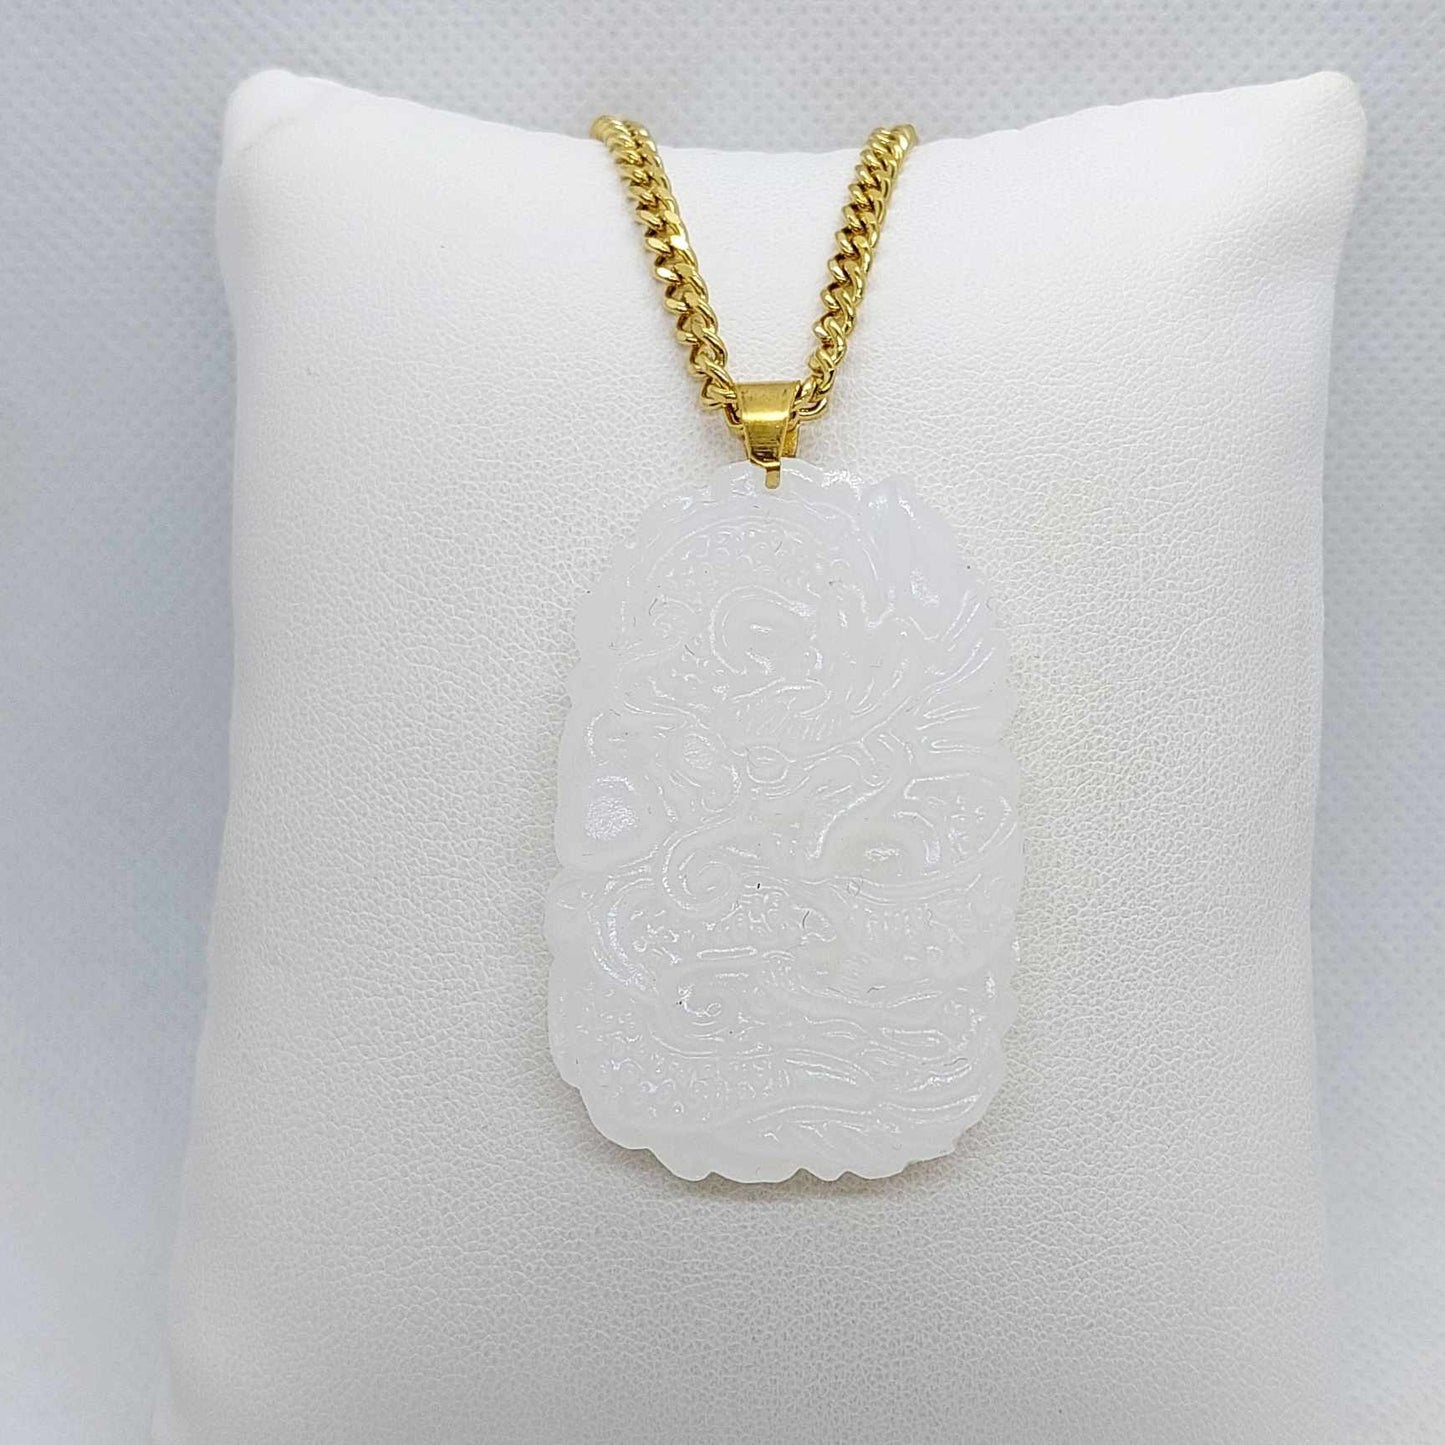 Natural White Hetian Jade Dragon Pendant with Gold Plated Stainless Steel Chain Necklace